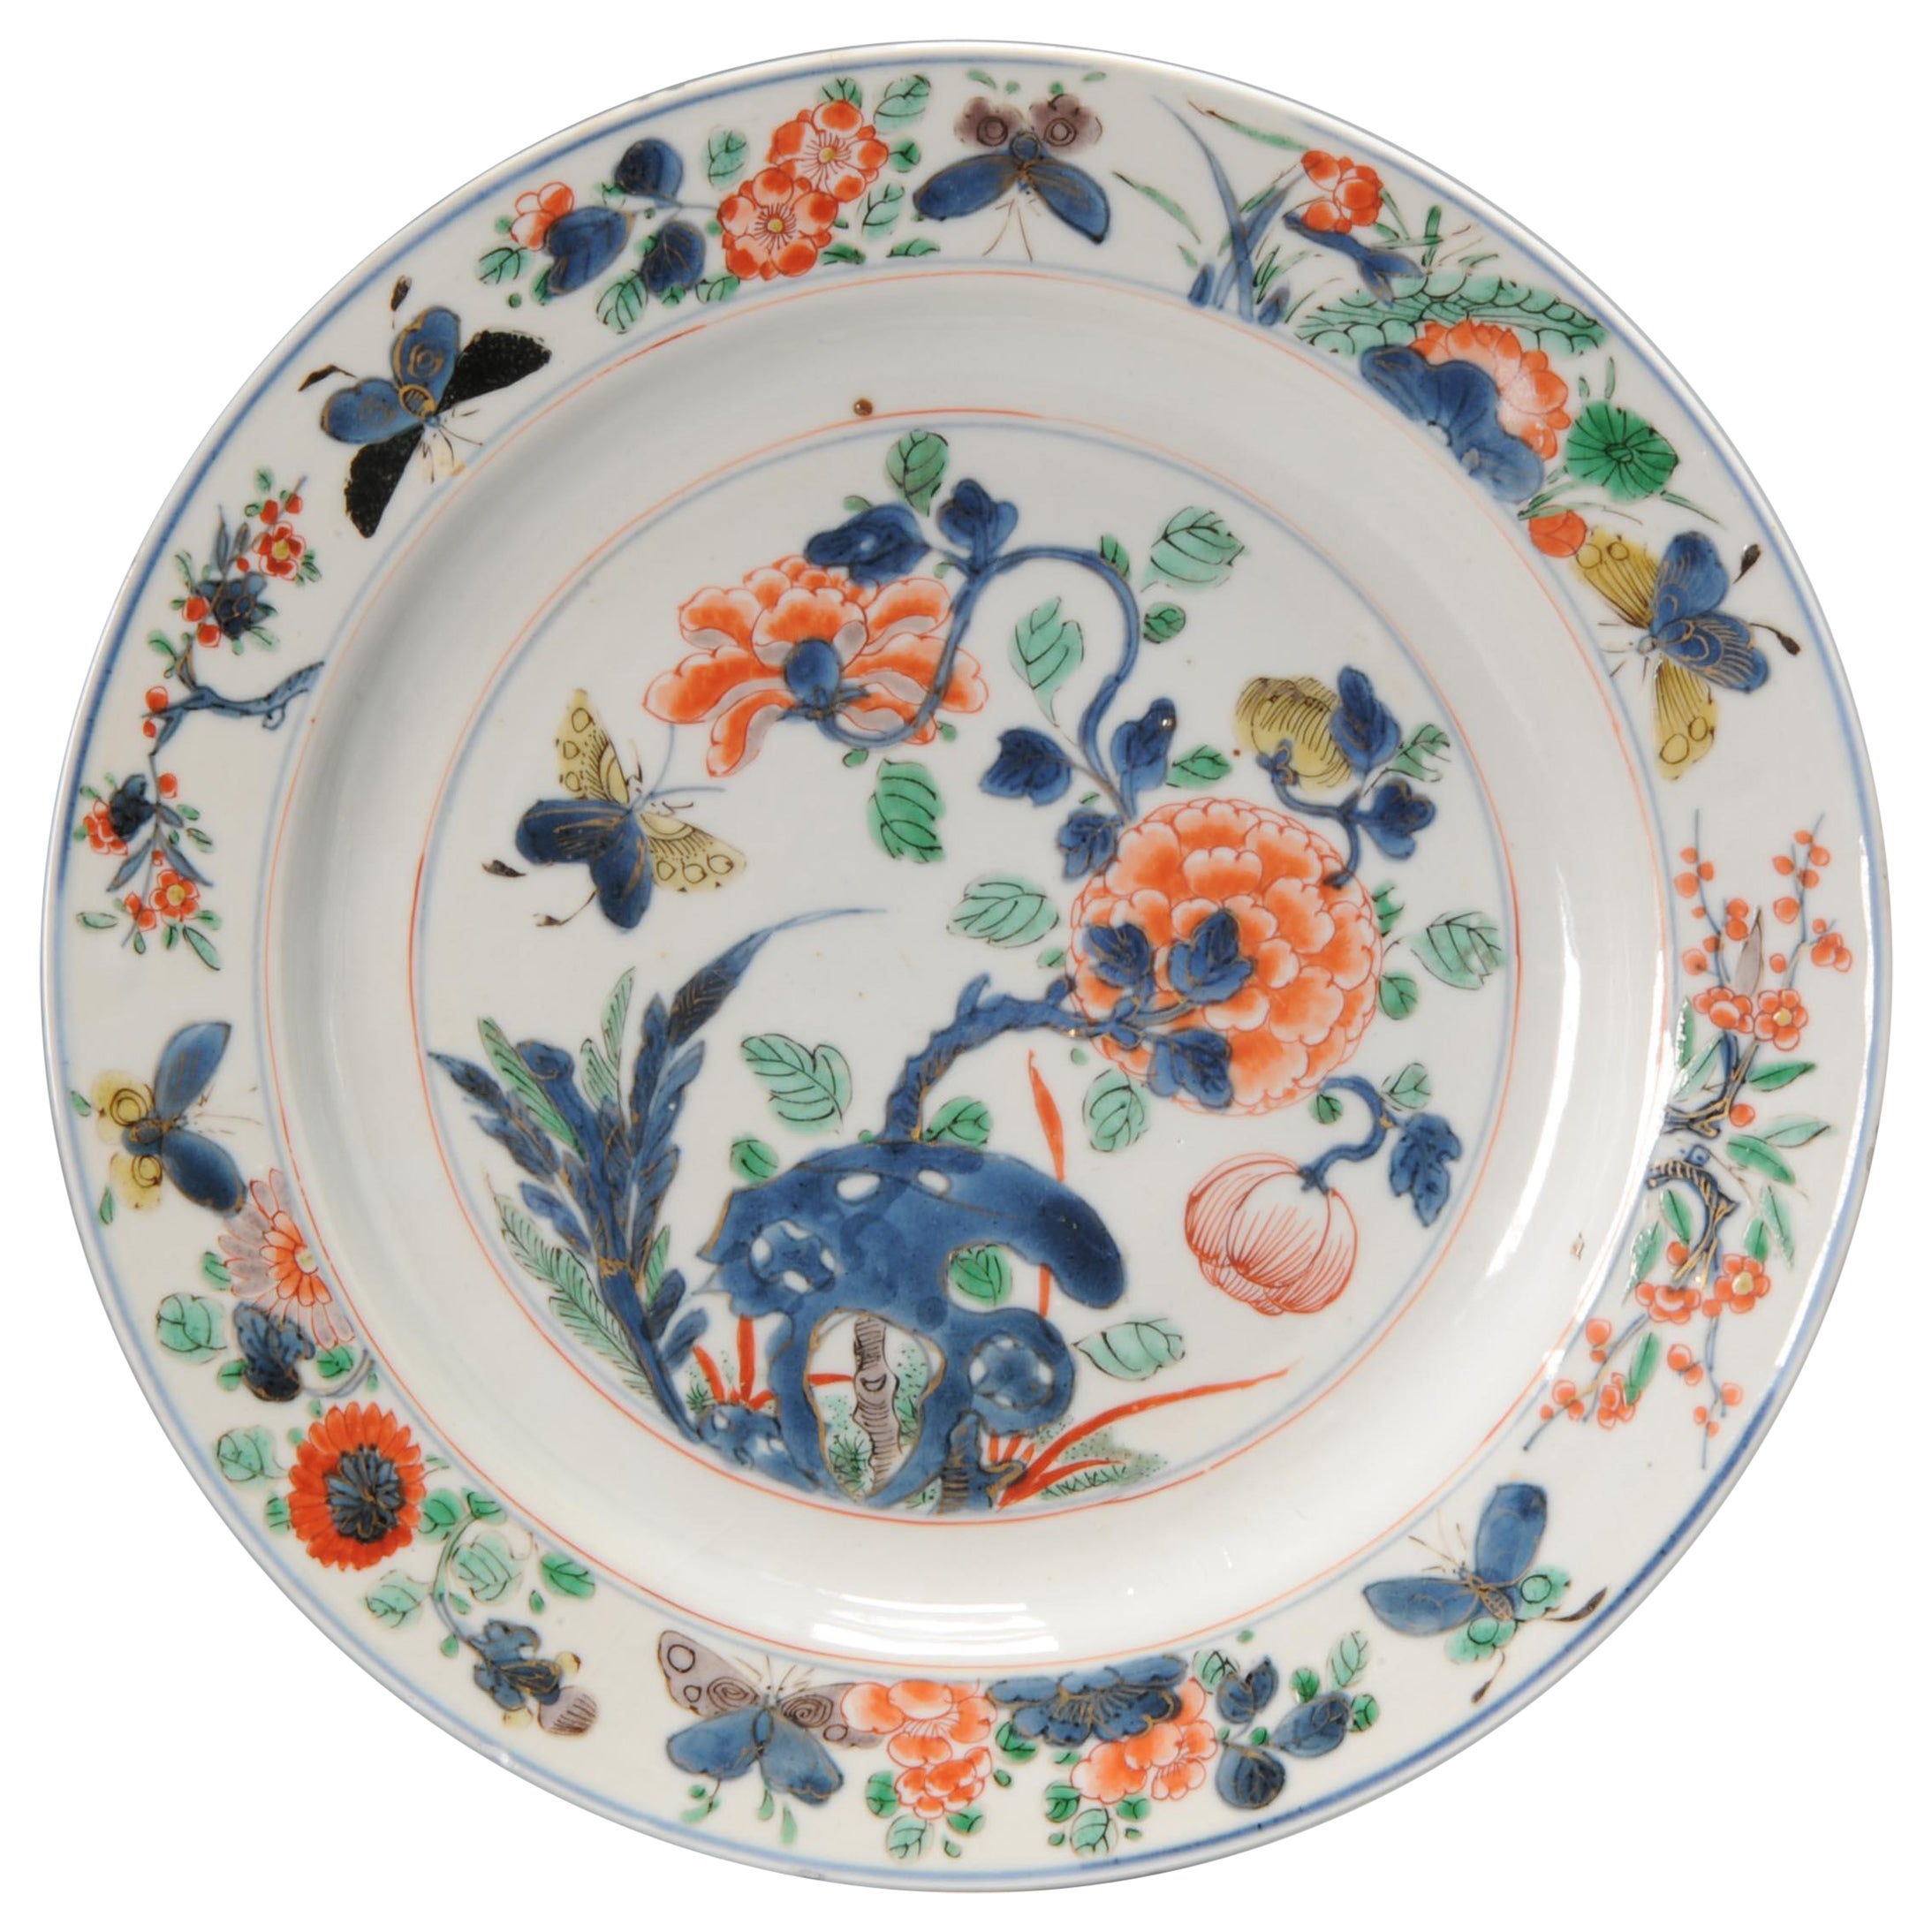 Quality Kangxi Period Chinese Porcelain Famille Verte Plate China, 18th Century For Sale